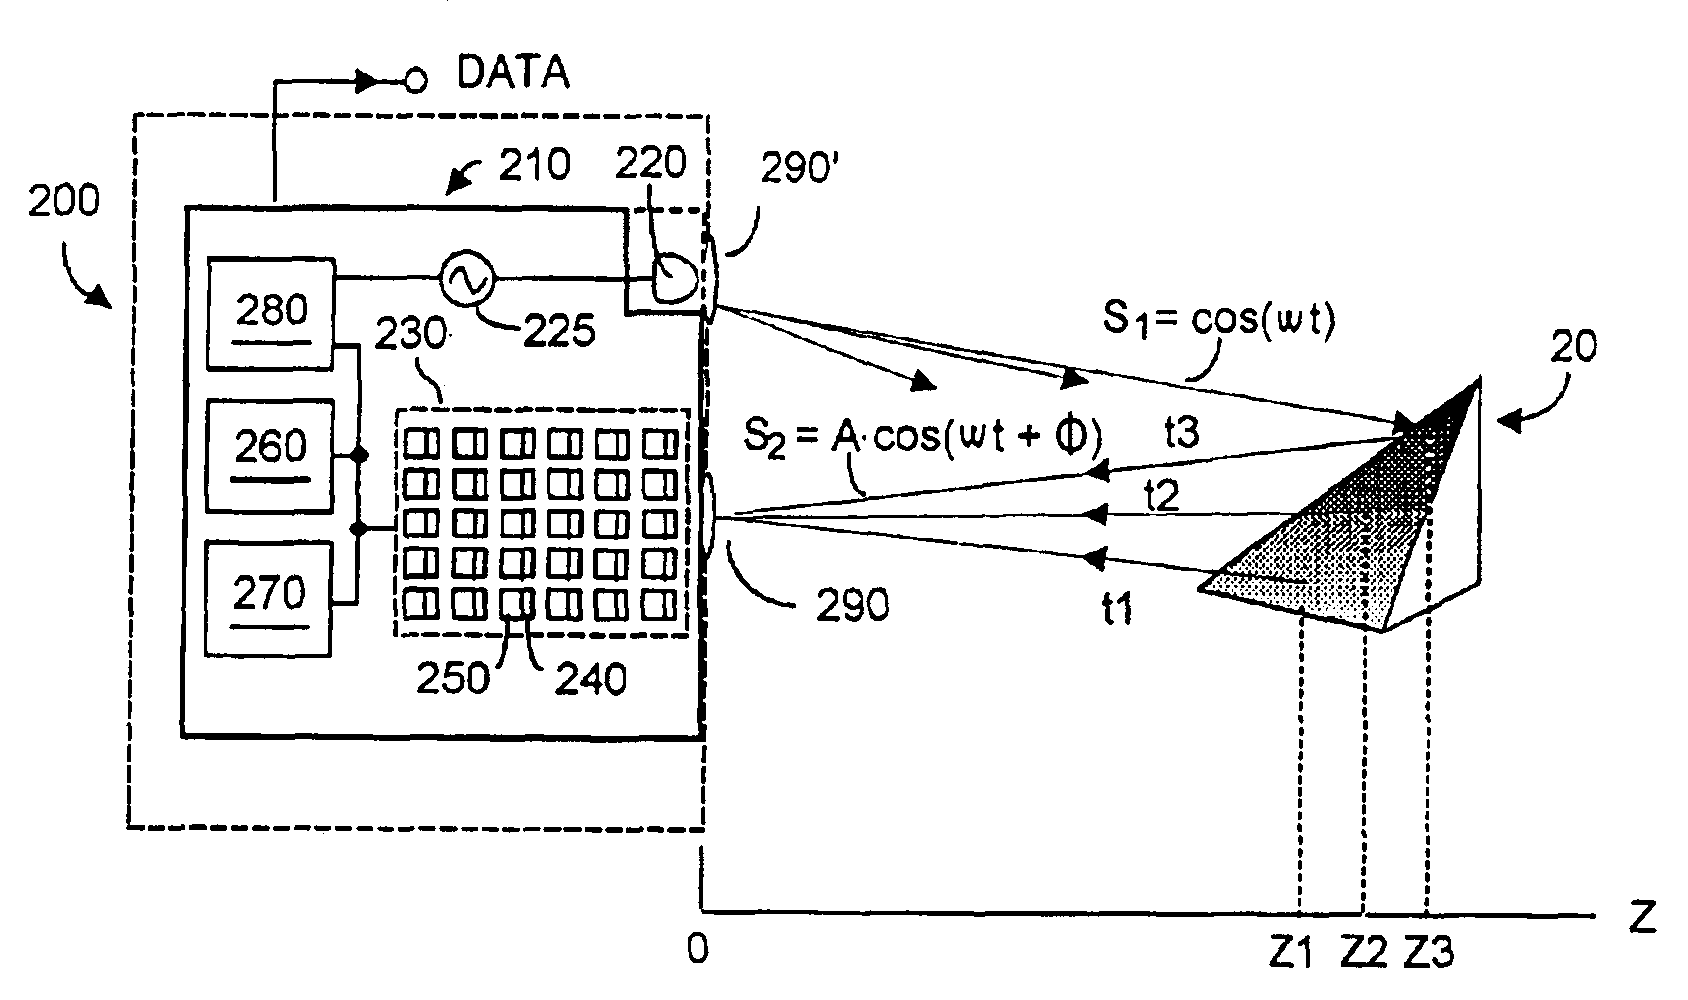 Methods and devices for charge management for three-dimensional sensing